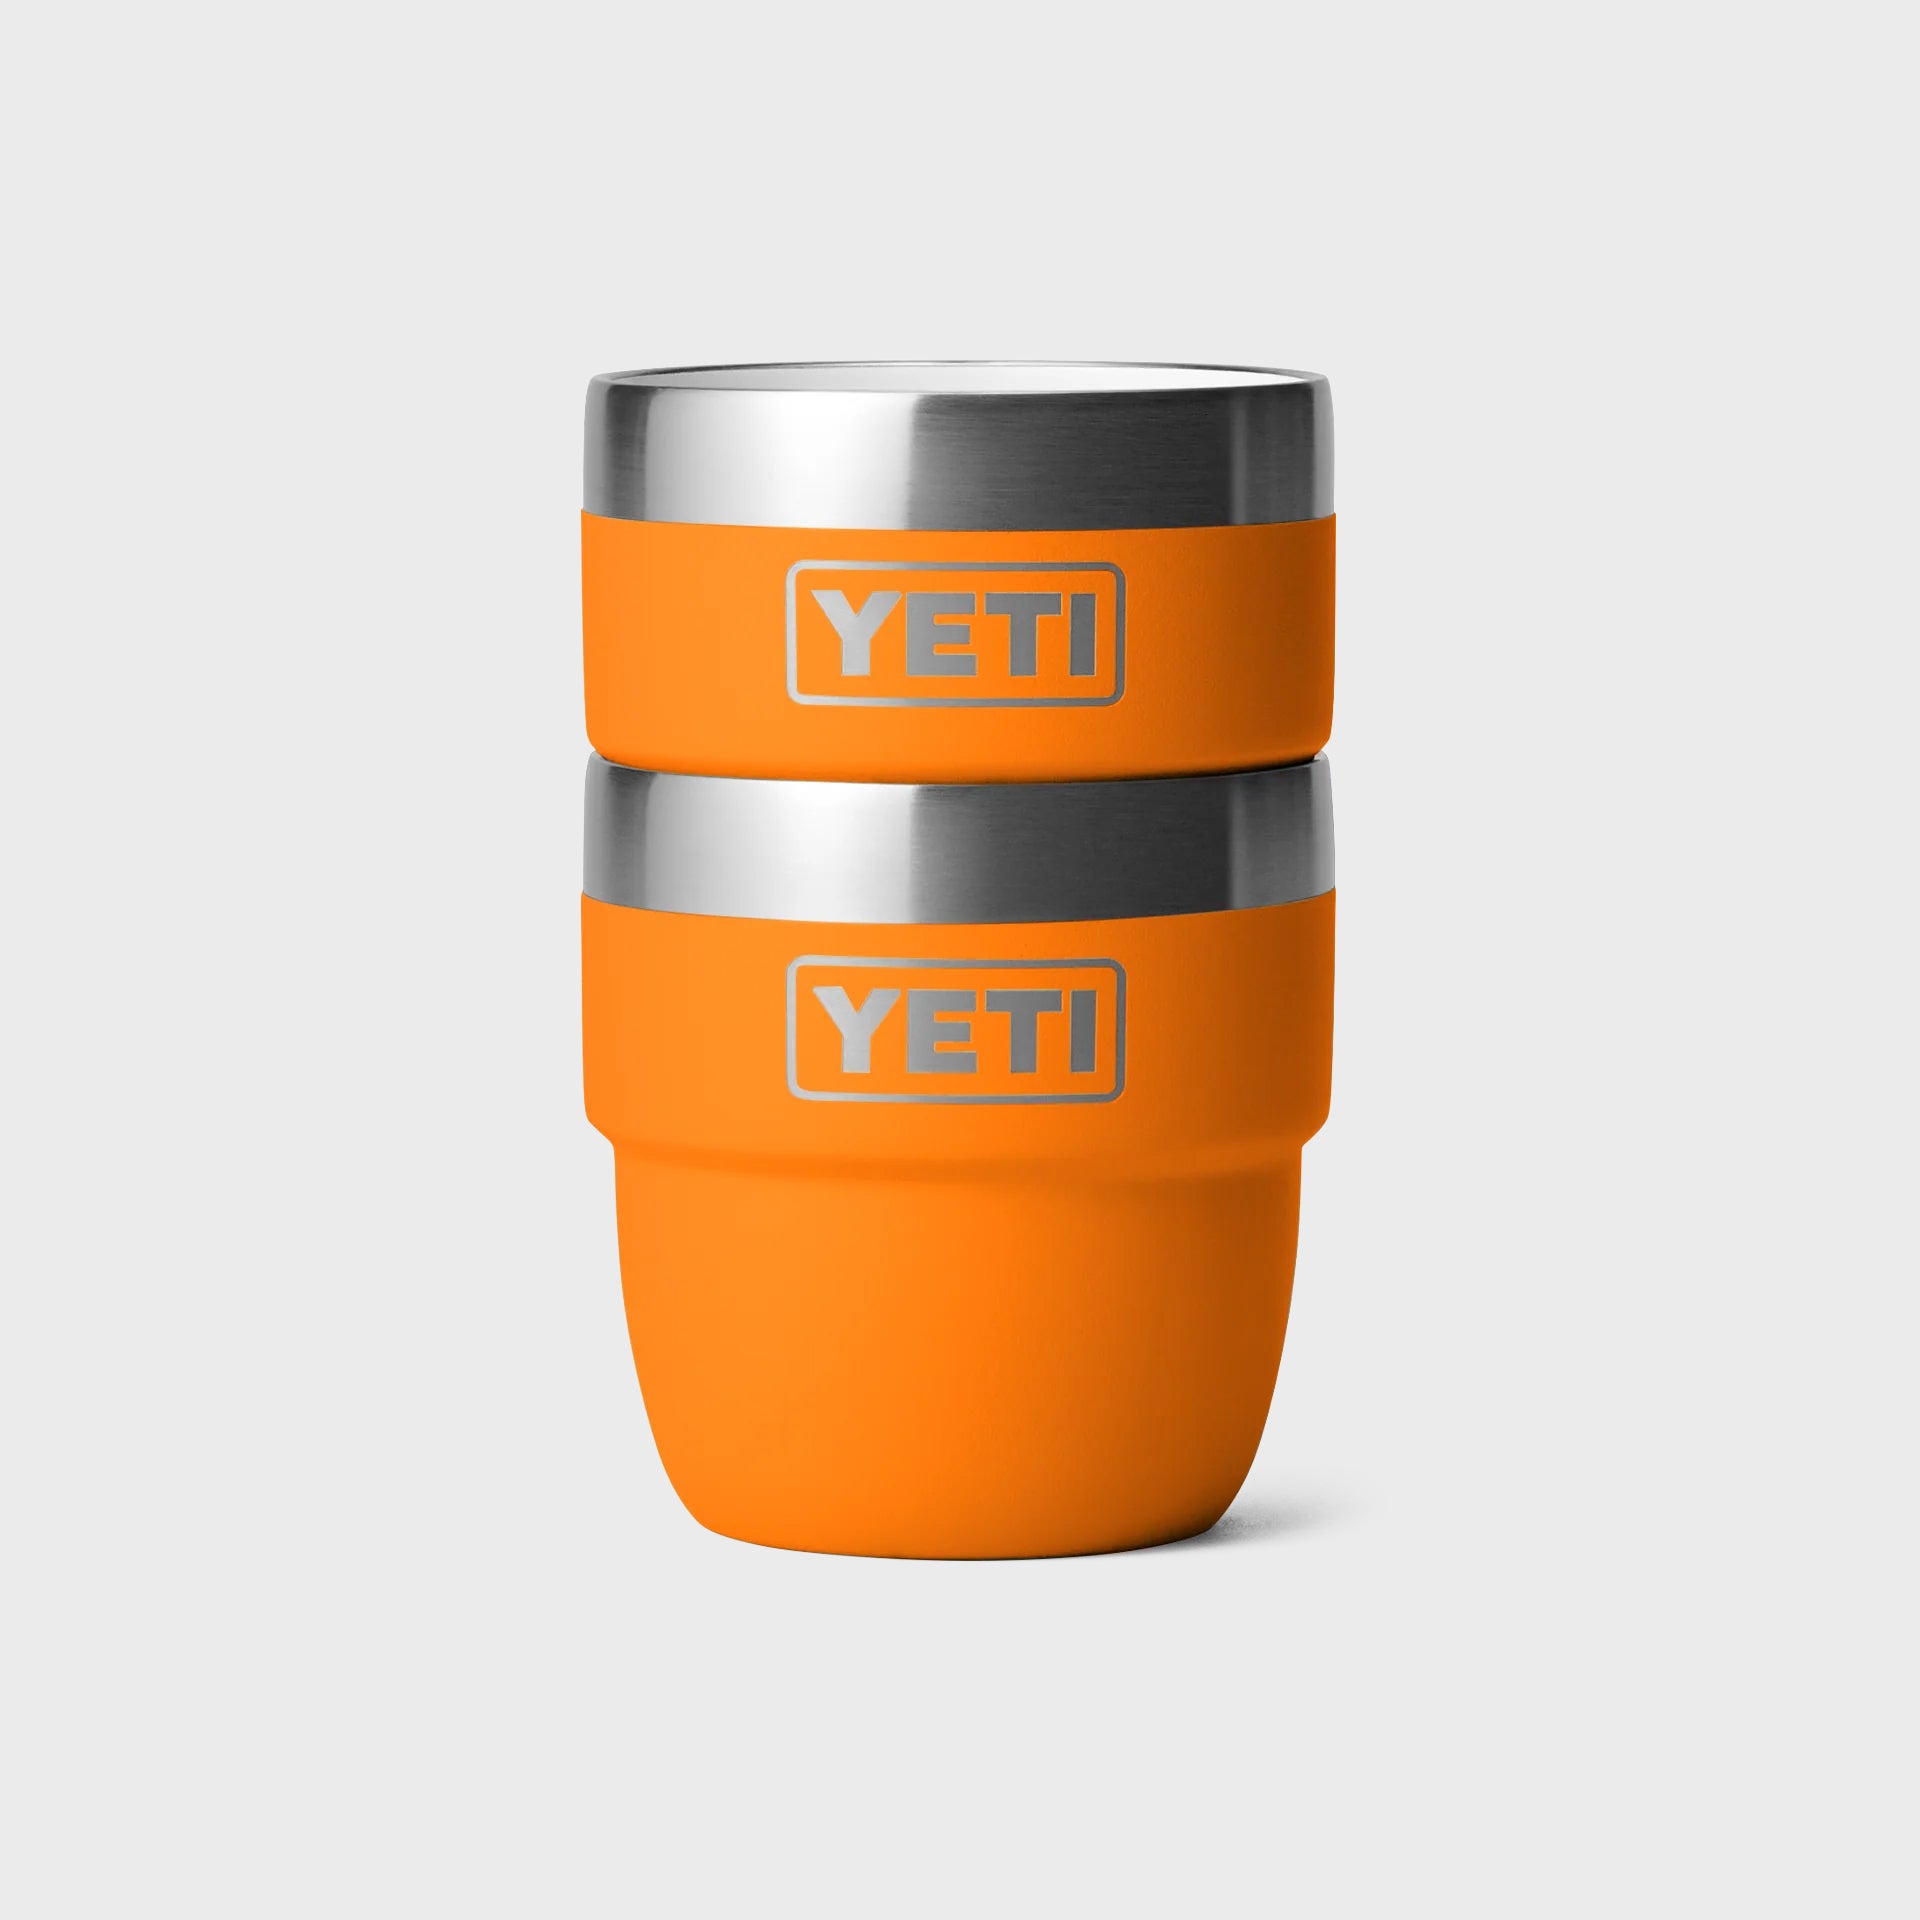 Yeti Rambler 4 oz Stackable Espresso Cups (2 Pack) - King Crab - ManGo Surfing